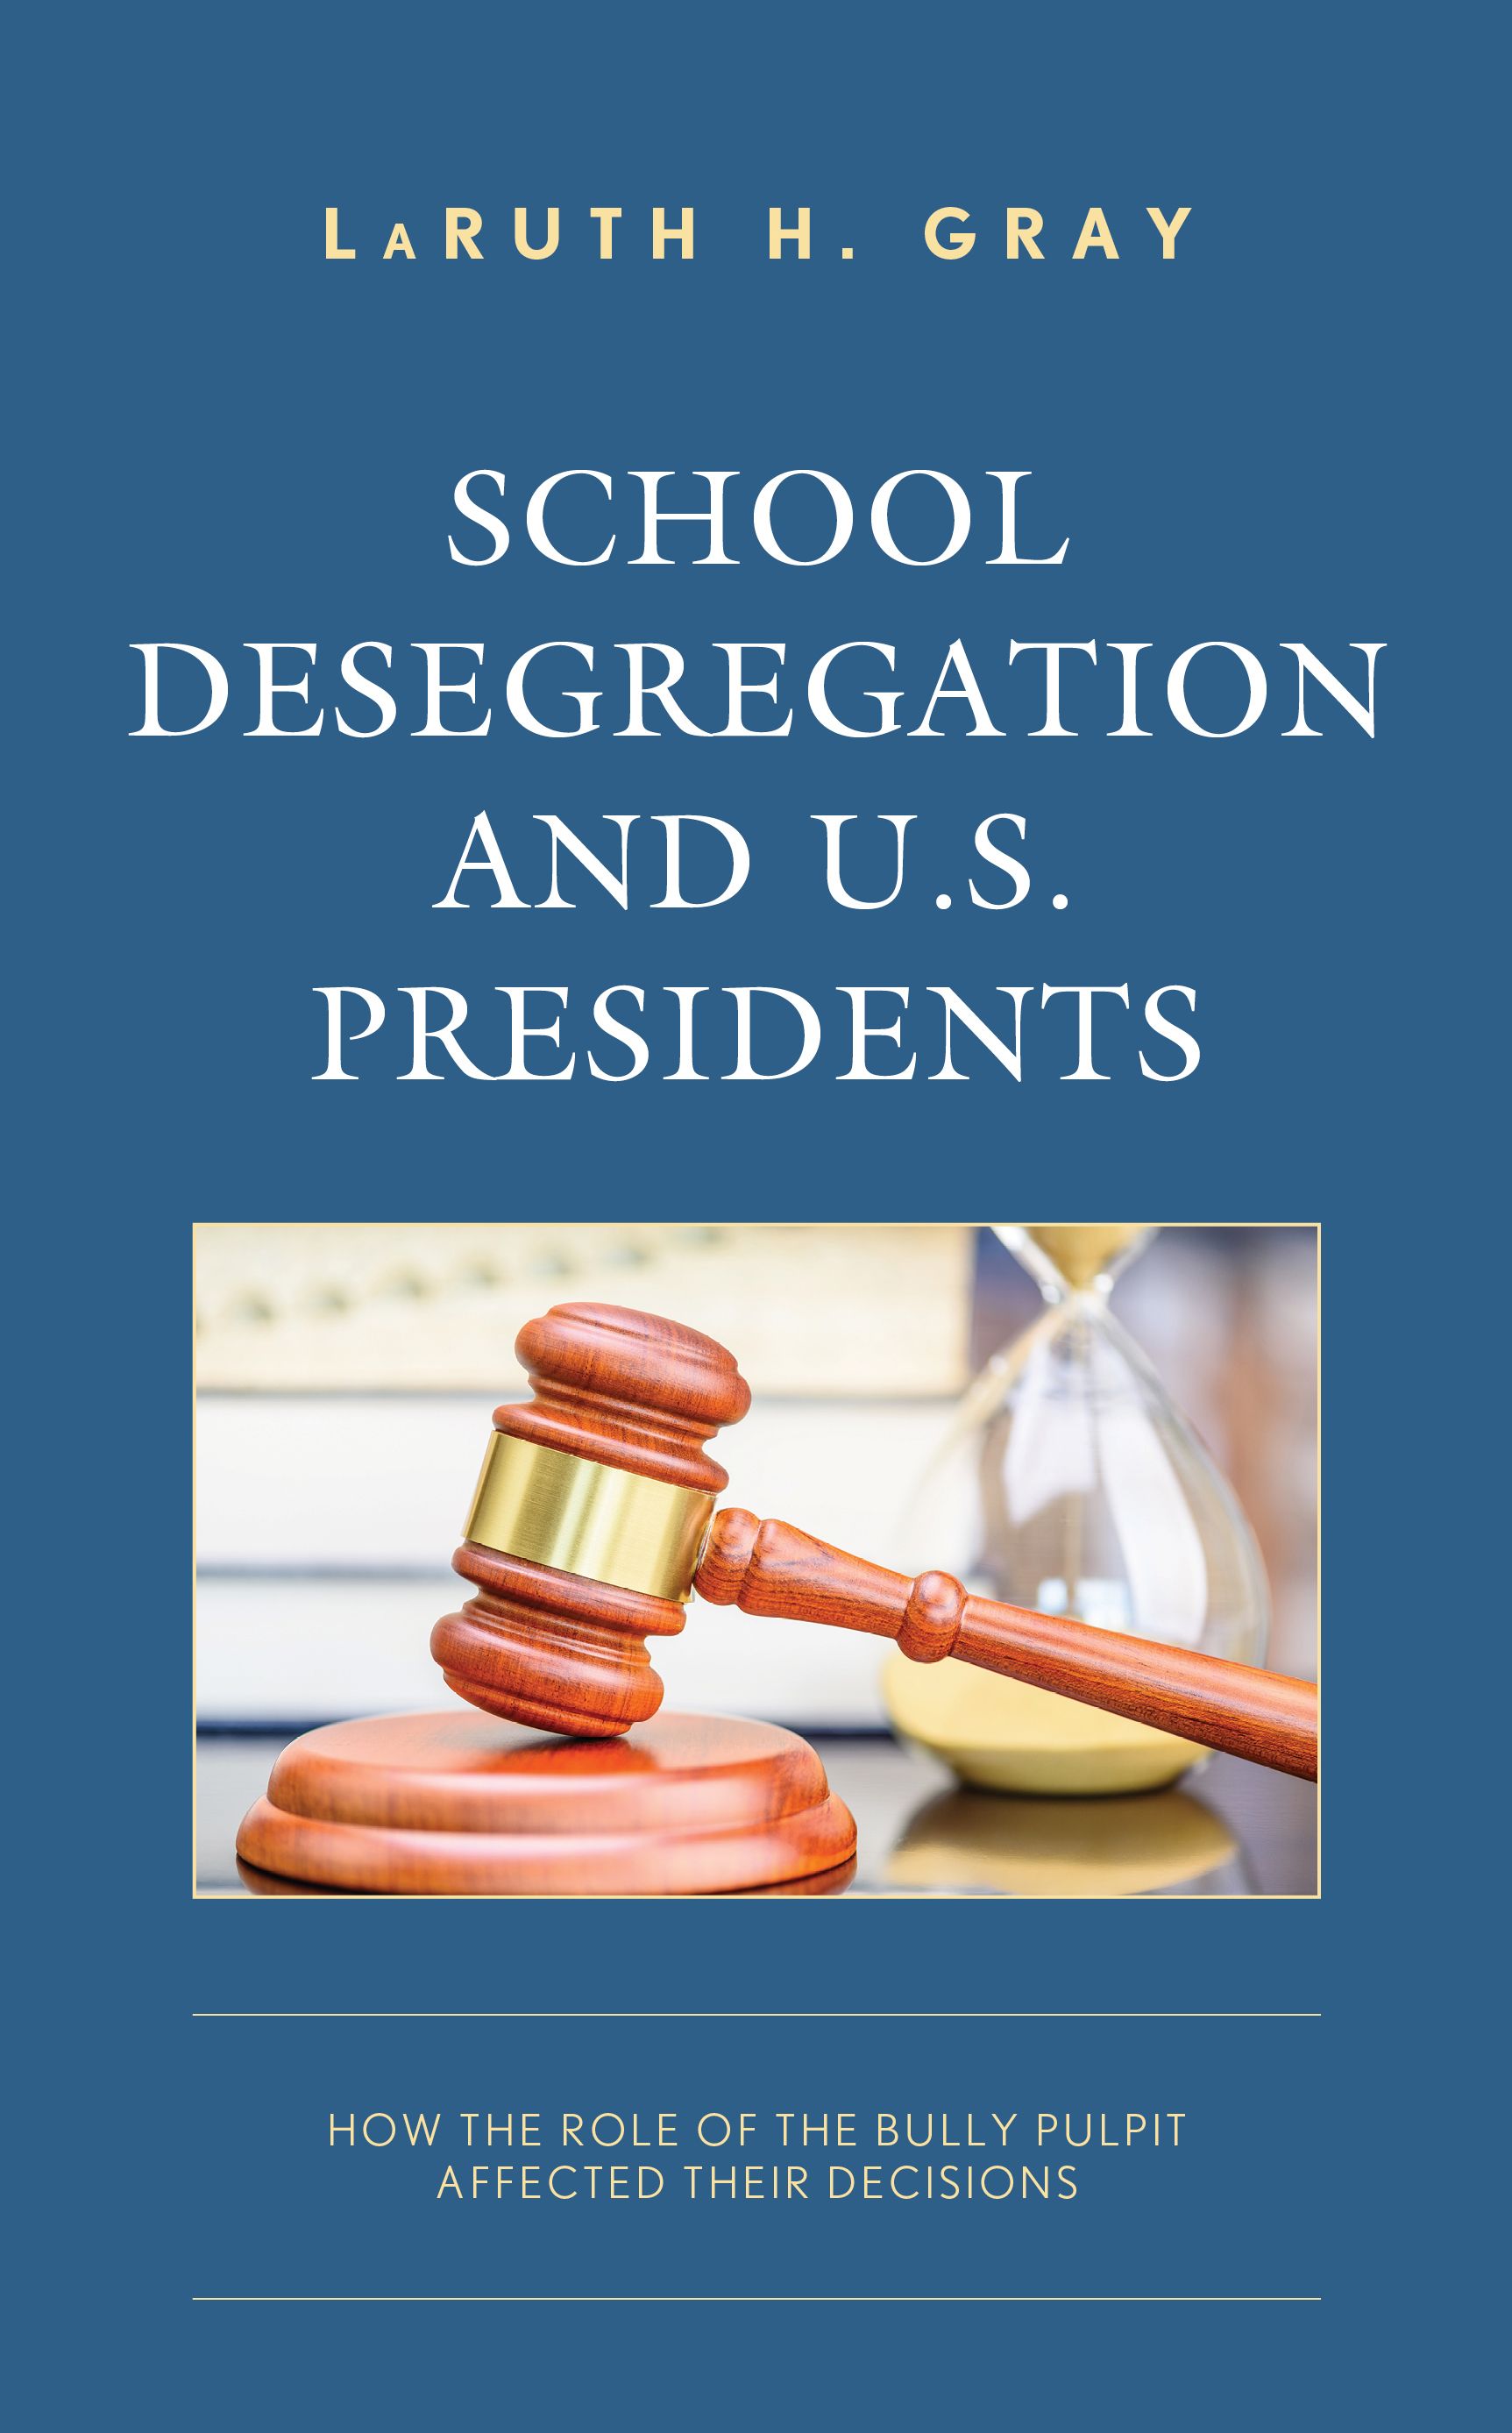 School Desegregation and U.S. Presidents: How the Role of the Bully Pulpit Affected Their Decisions